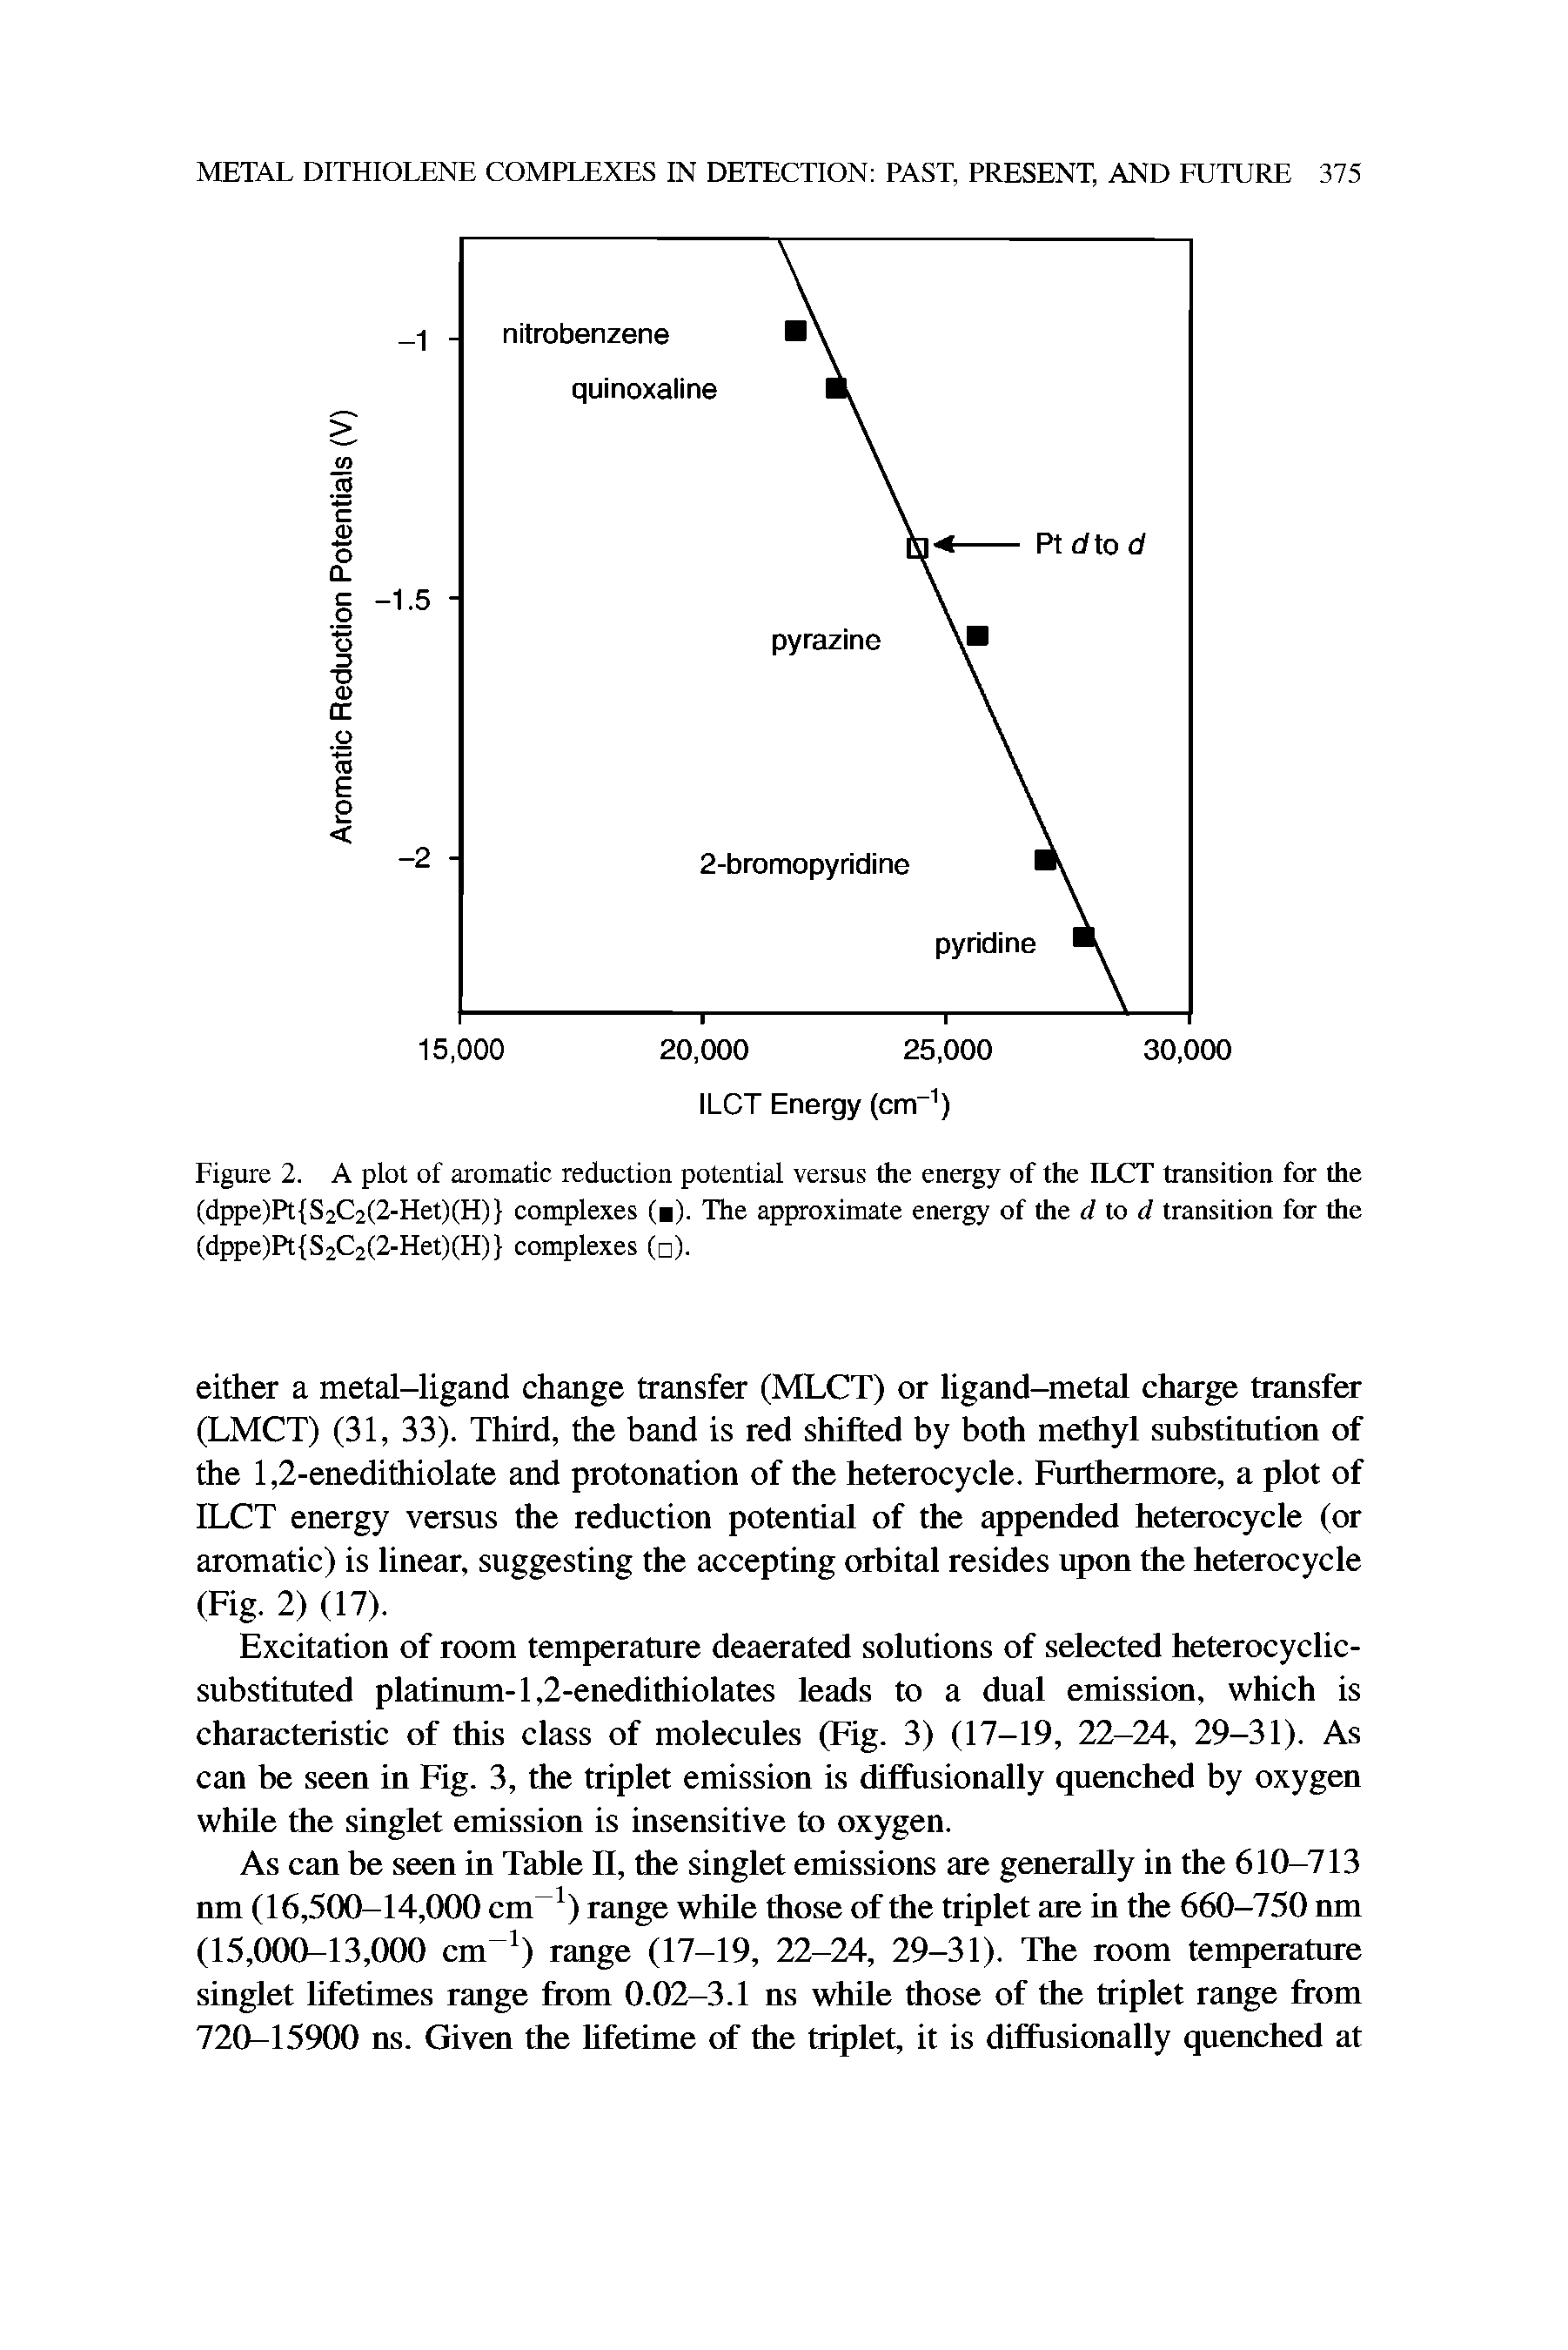 Figure 2. A plot of aromatic reduction potential versus the energy of the ILCT transition for the (dppe)Pt S2C2(2-Het)(H) complexes ( ). The approximate energy of the d to d transition for the (dppe)Pt S2C2(2-Het)(H) complexes ( ).